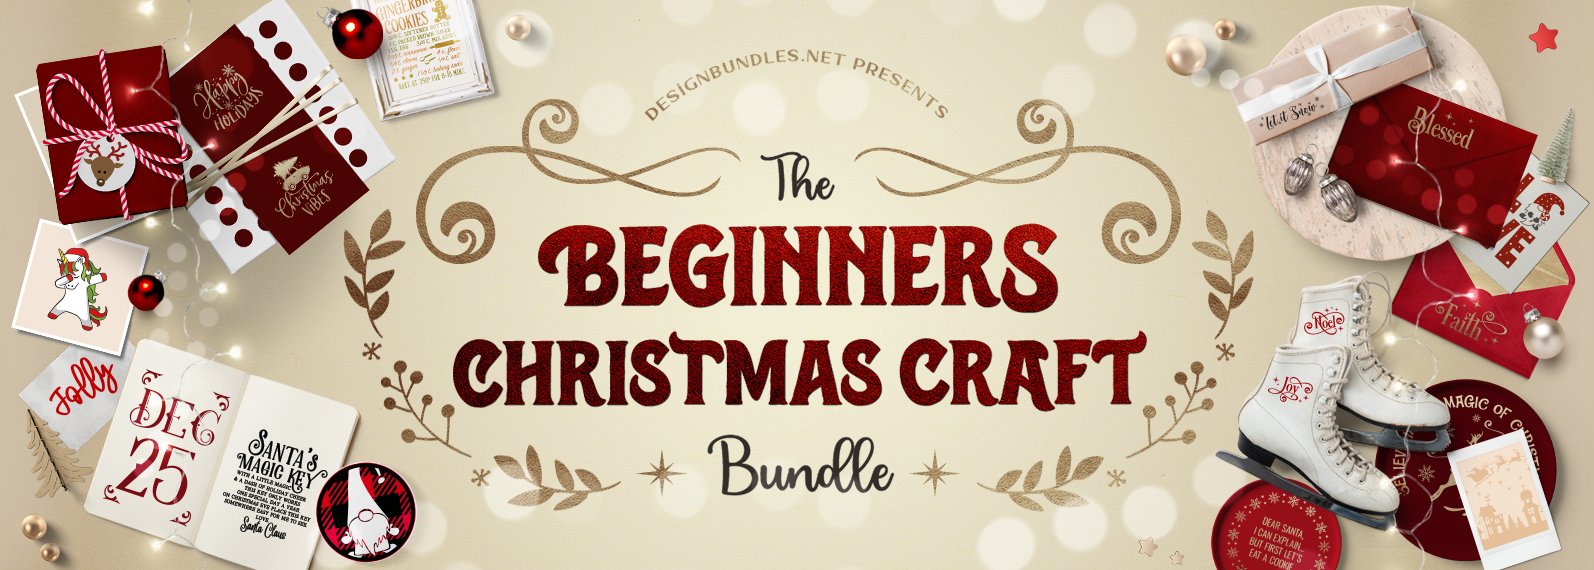 The Beginners Christmas Craft Bundle Cover